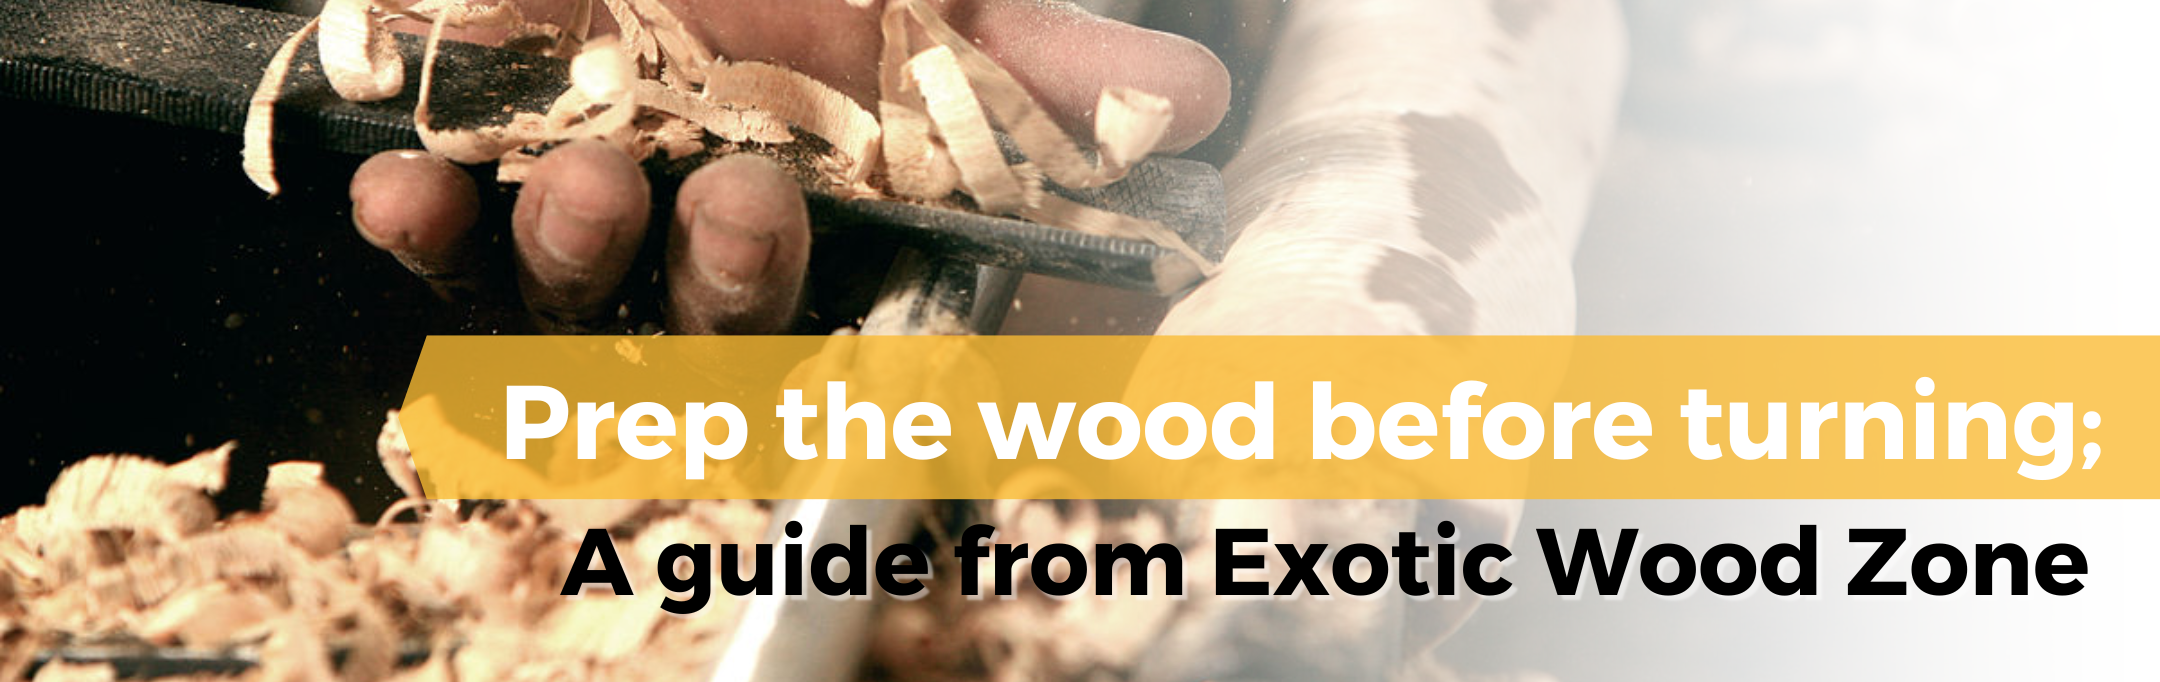 Prep your wood before turning; A guide from Exotic Wood Zone